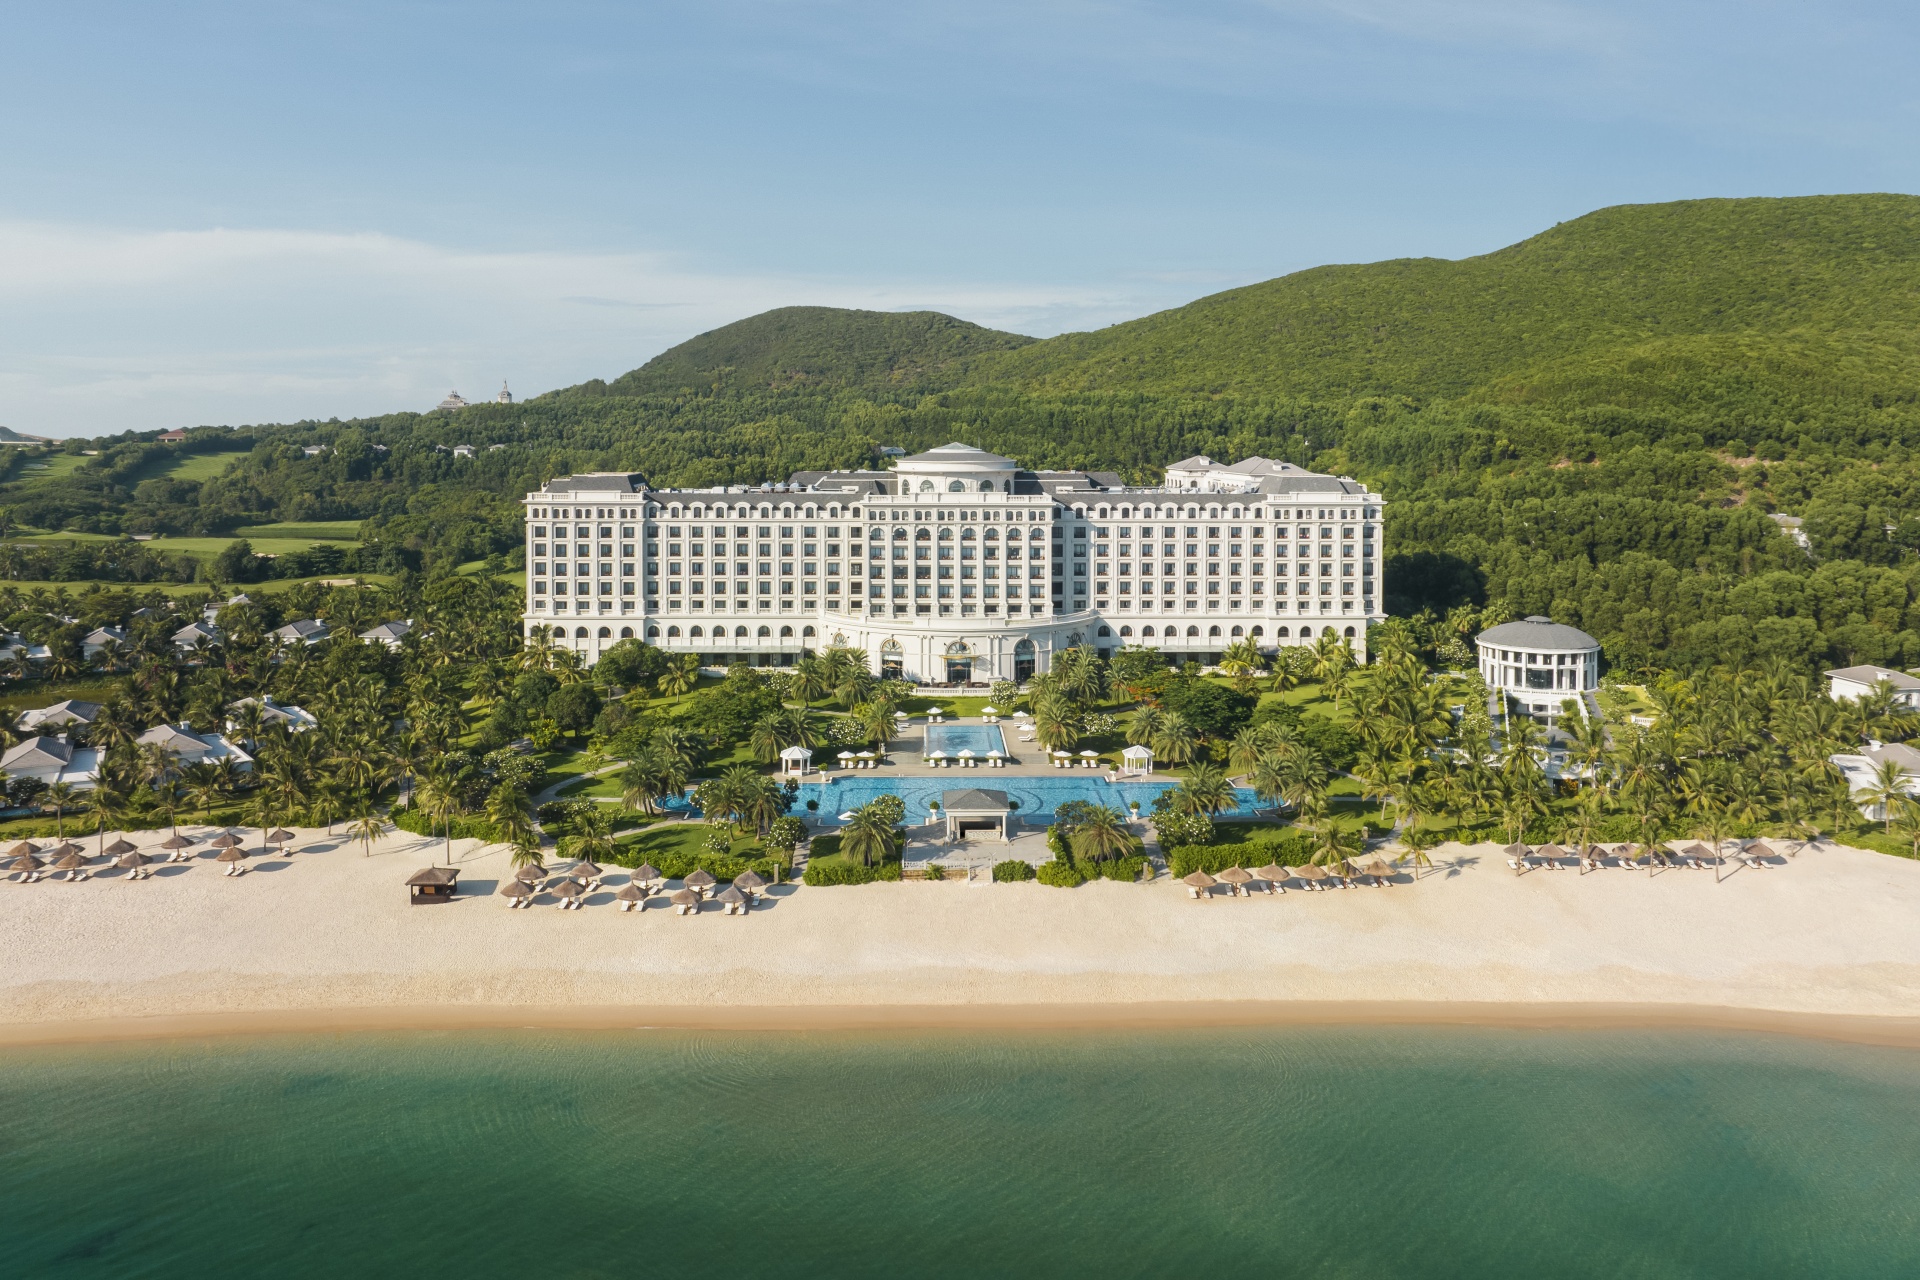 Marriott Bonvoy unveils trio of new beachside resorts in Nha Trang, Danang, and Hoi An